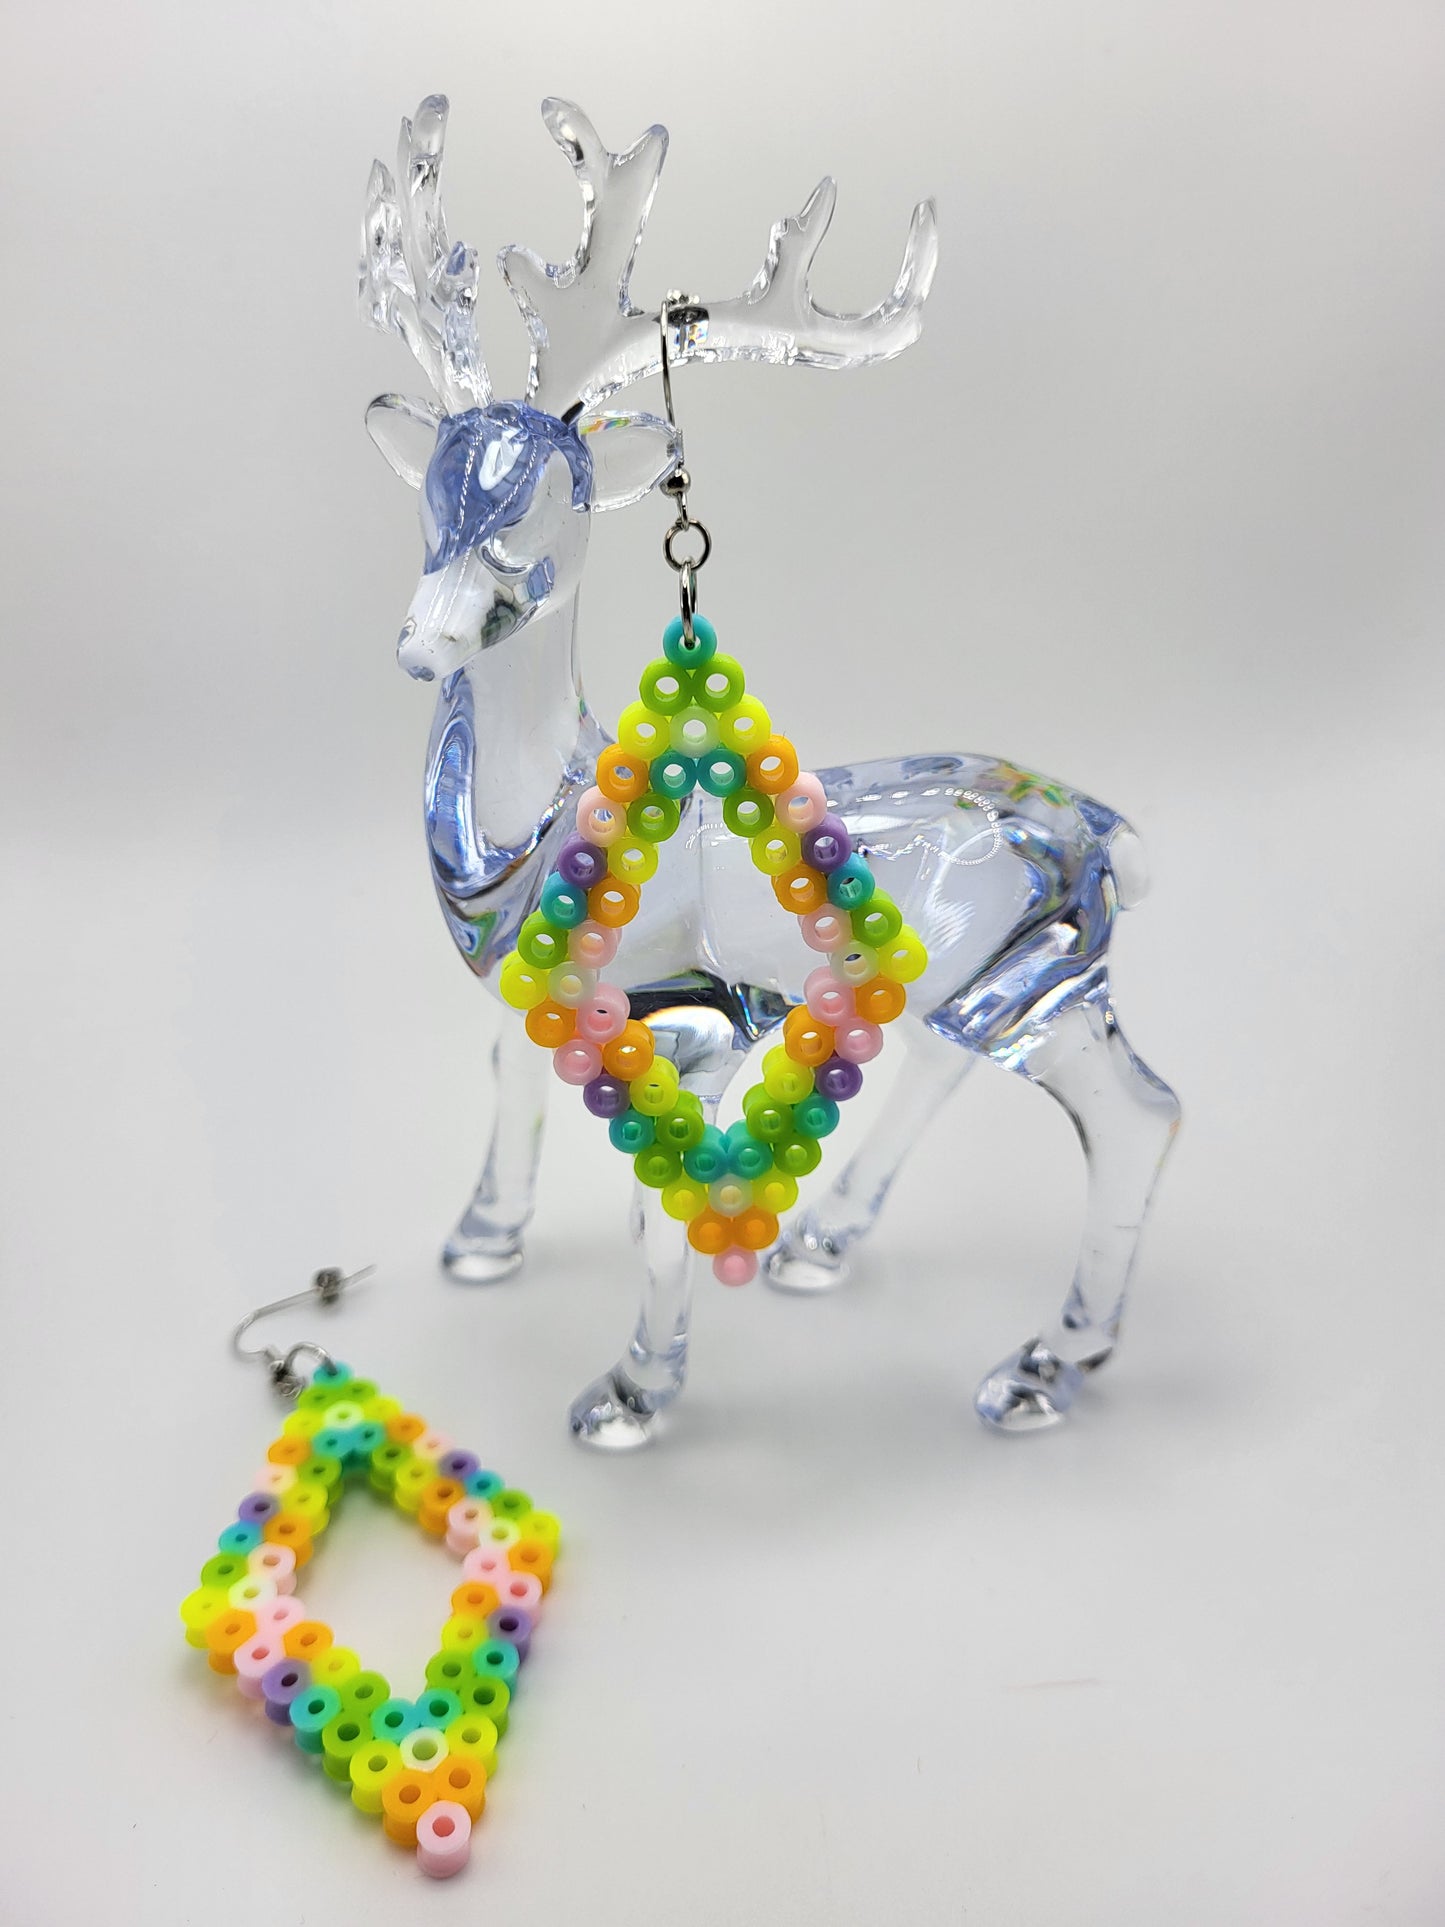 "Pastel Rainbow Perler Bead Earrings – Handcrafted Colorful Art for Your Ears!"